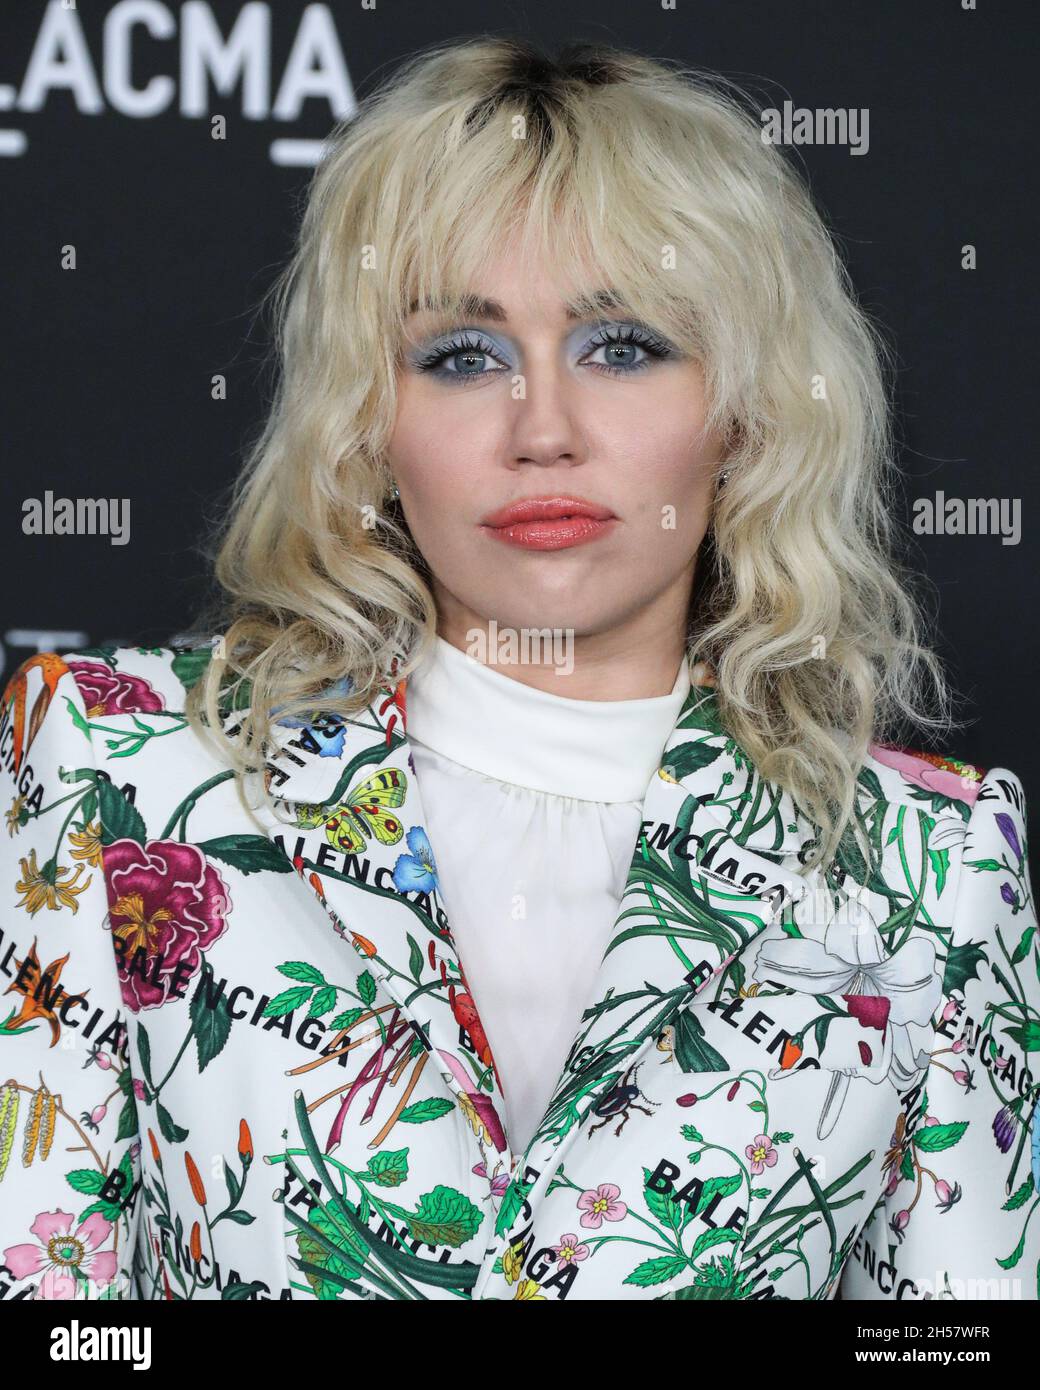 LOS ANGELES, CALIFORNIA, USA - NOVEMBER 06: Singer Miley Cyrus wearing a Gucci X Balenciaga suit and Jared Lehr jewelry arrives at the 10th Annual LACMA Art + Film Gala 2021 held at the Los Angeles County Museum of Art on November 6, 2021 in Los Angeles, California, United States. (Photo by Xavier Collin/Image Press Agency/Sipa USA) Stock Photo